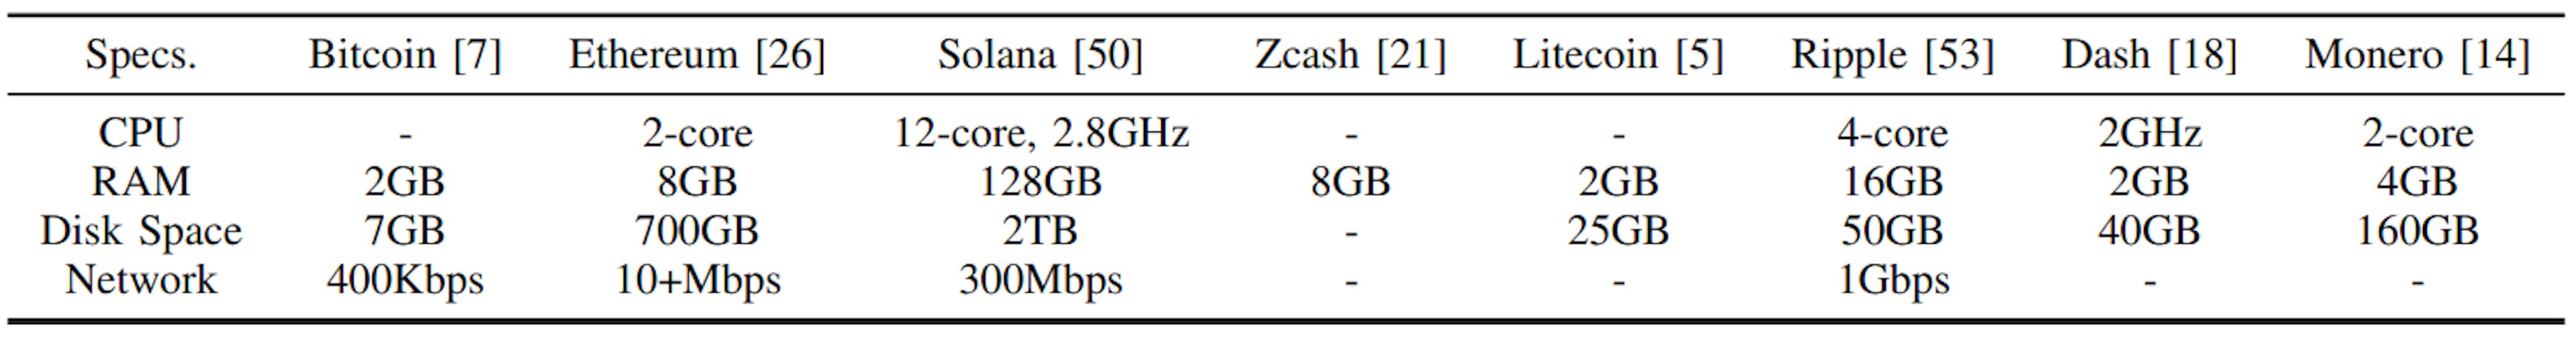 TABLE IMINIMAL SYSTEM SPECIFICATION OF FULL NODES FOR VARIOUS BLOCKCHAINS. DASH MEANS UNSPECIFIED.